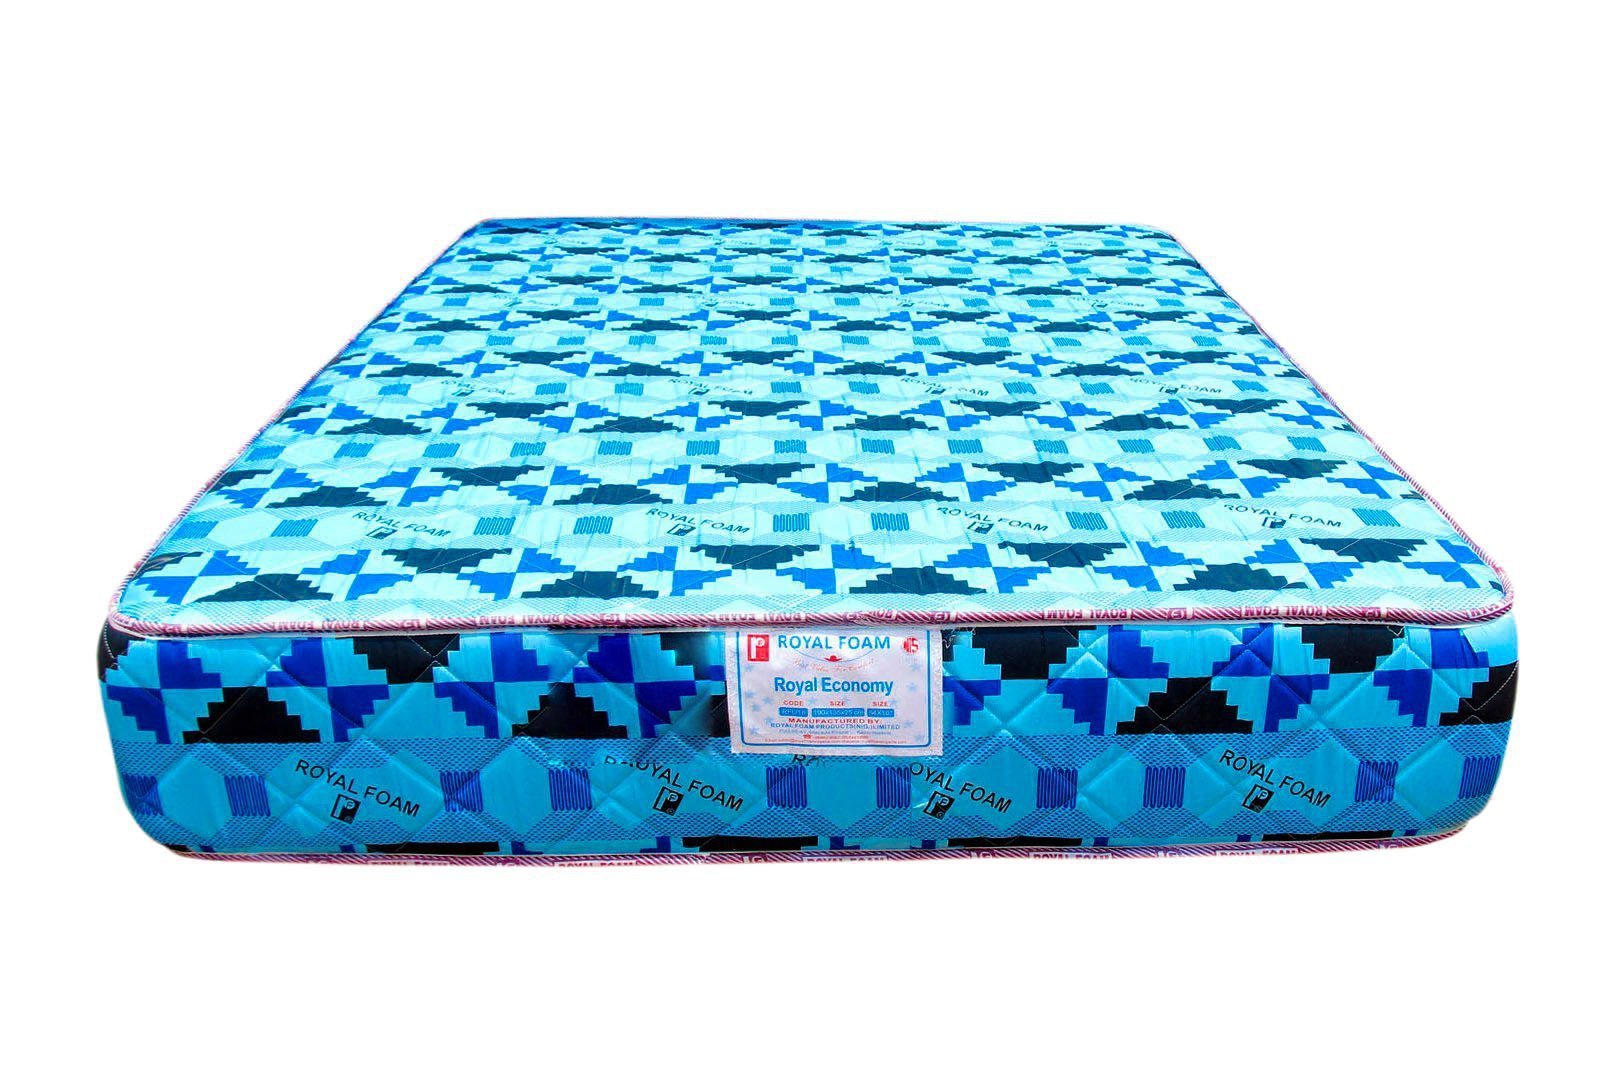 Royal Economy-Poly Cotton Fabric - Fully Quilted Mattress [75 x 54 x 12"] [6ft x 4.4ft x 12inches](Lagos Only)